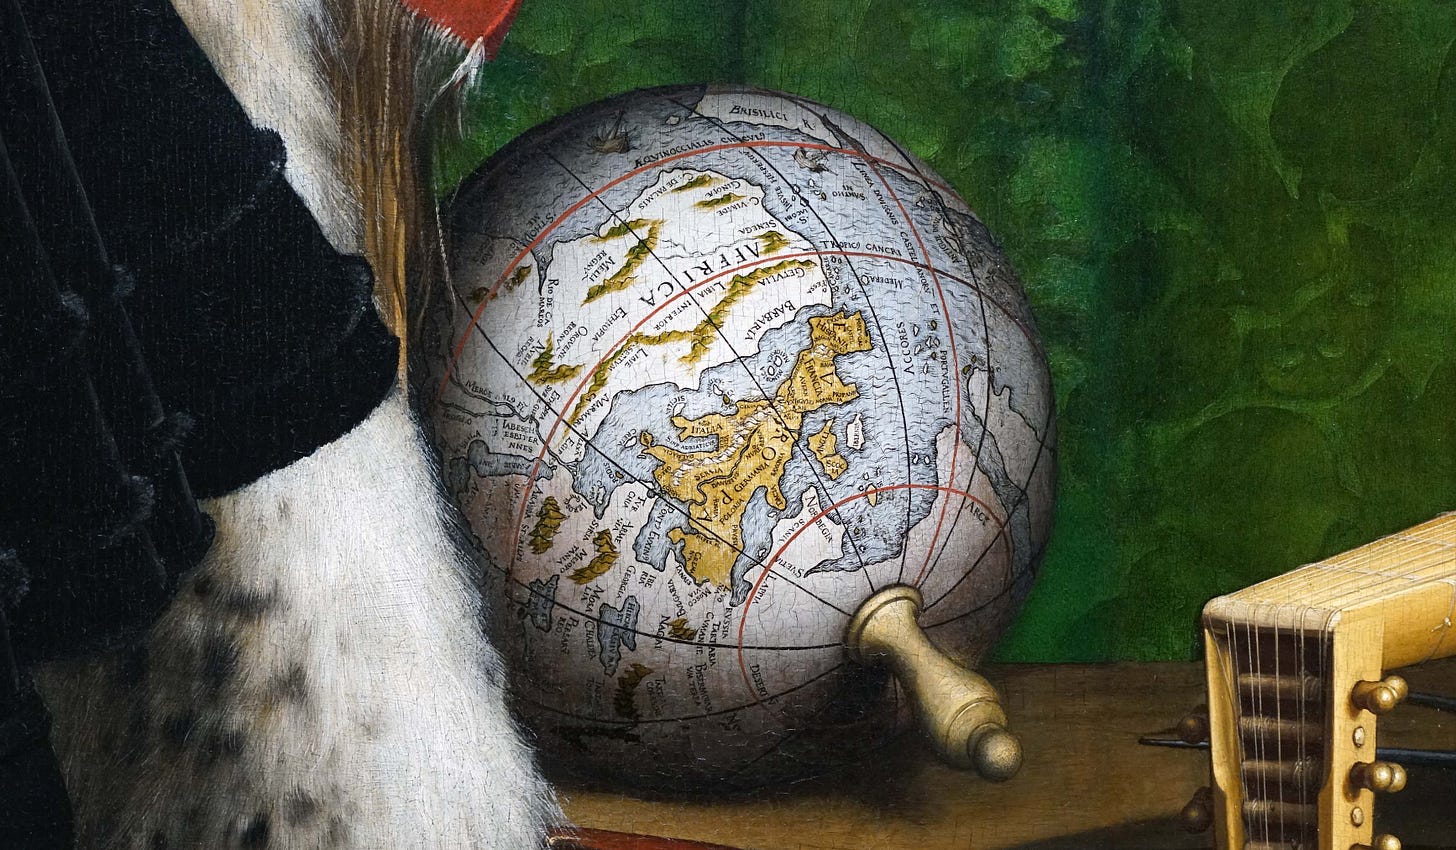 The carpet and the globe: Holbein's The Ambassadors reframed